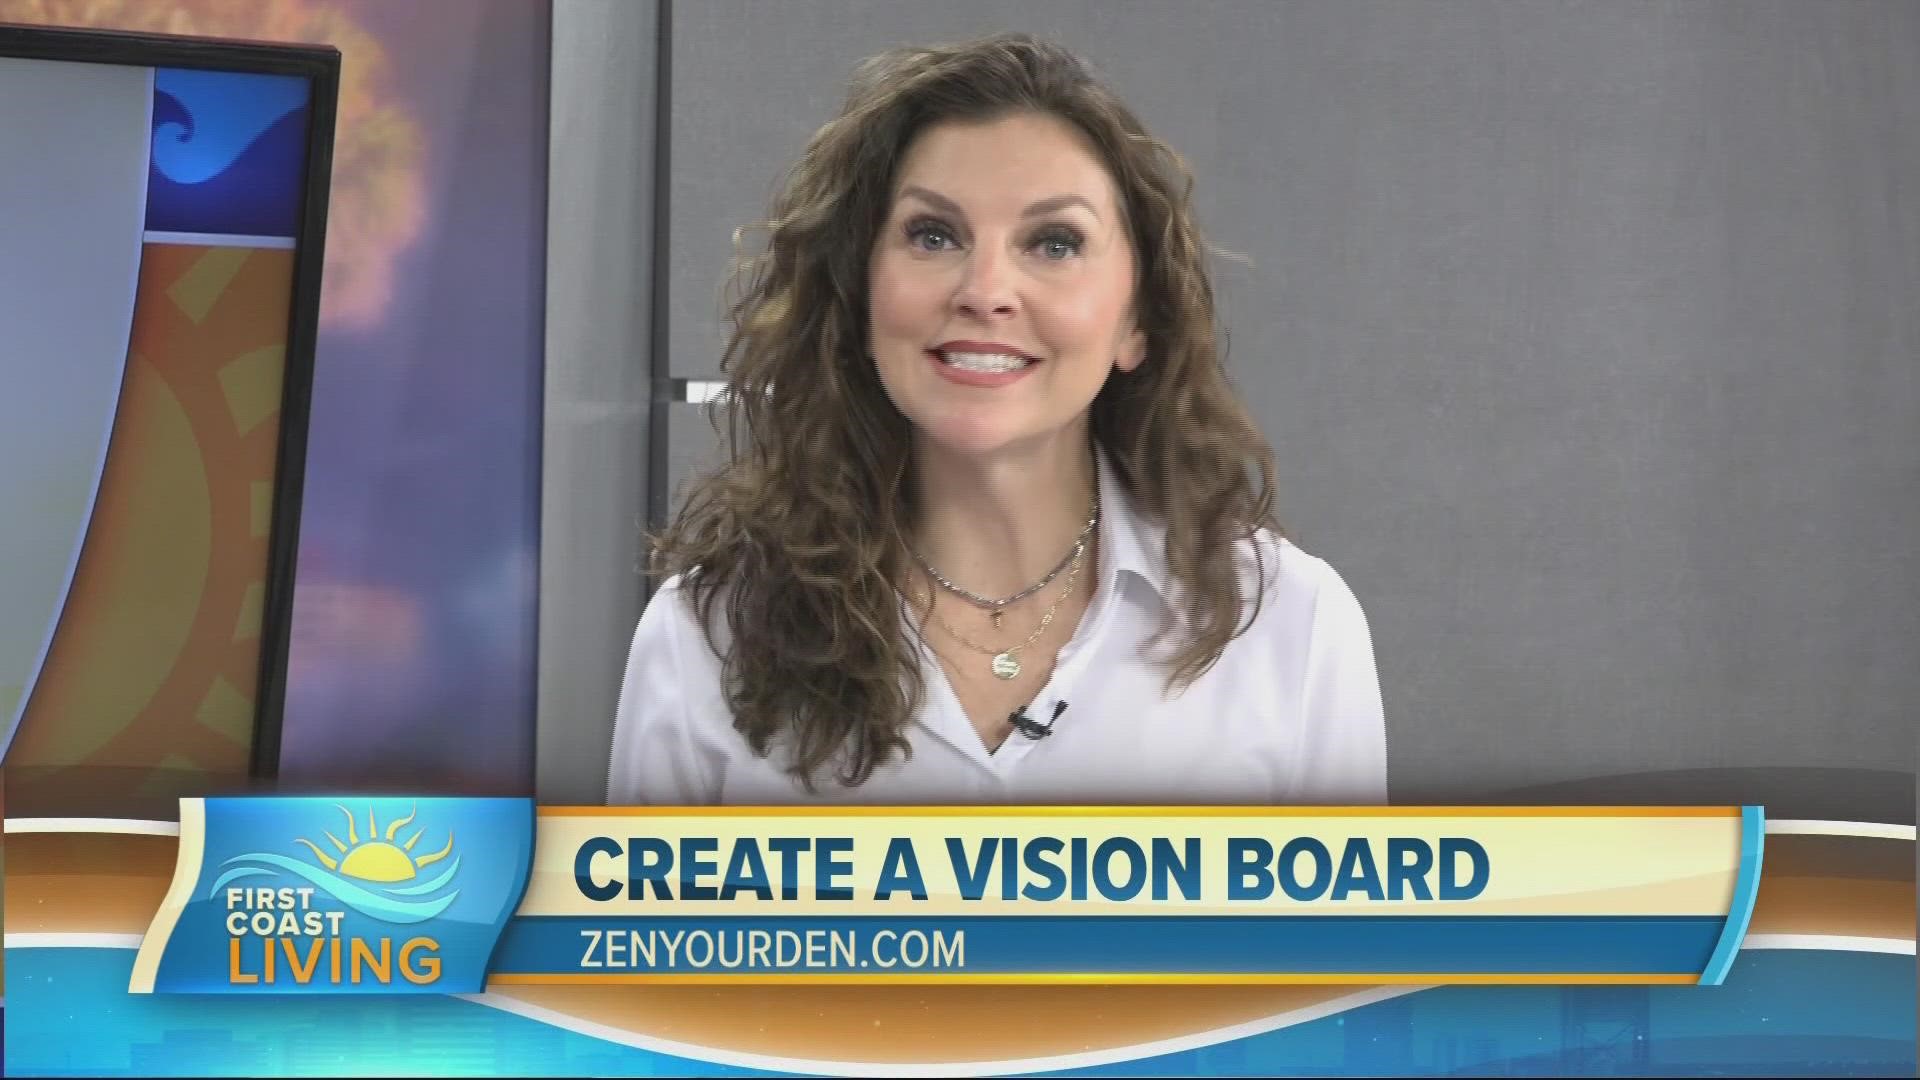 The Benefits of Creating a Vision Board